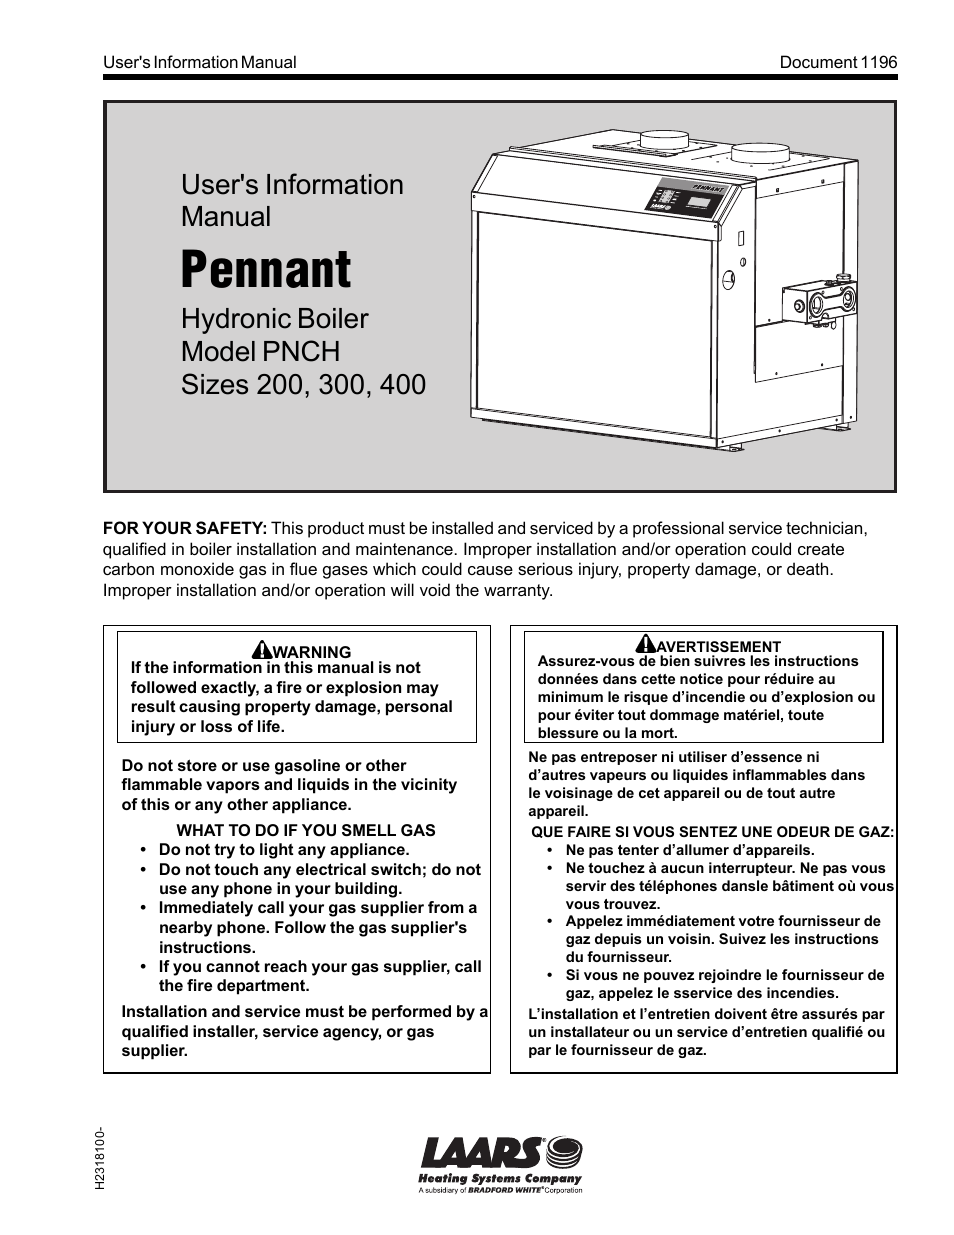 Pennant PNCH (Sizes 200, 300, 400) - Users Manual